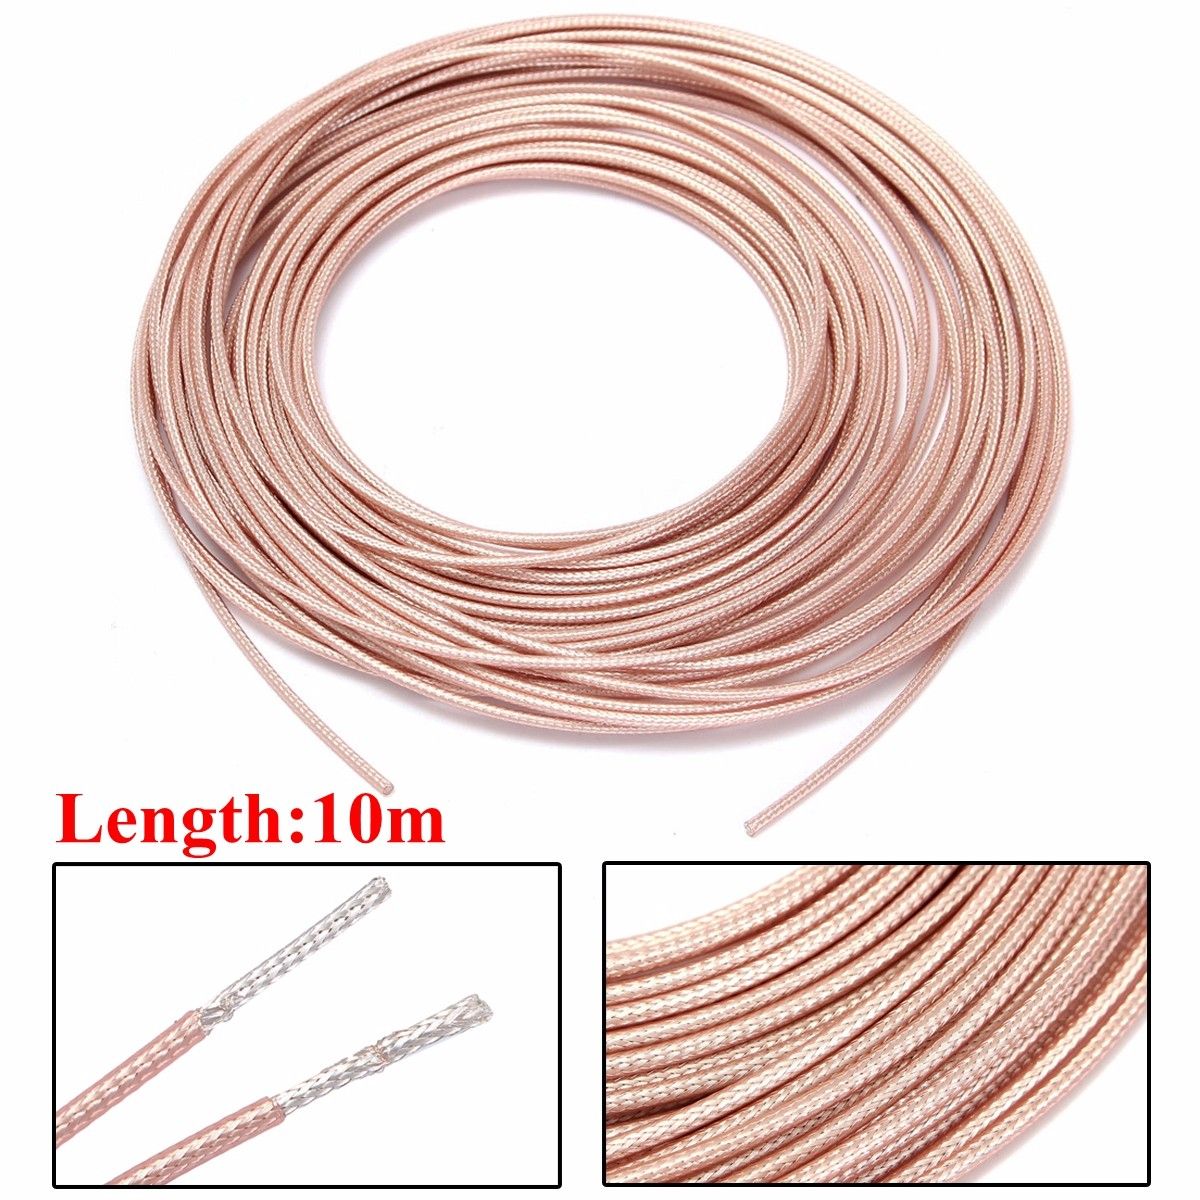 10m-RG316-RF-Coaxial-Cable-Connector-50ohm-M17113-Coax-Pigtail-32ft-1068598